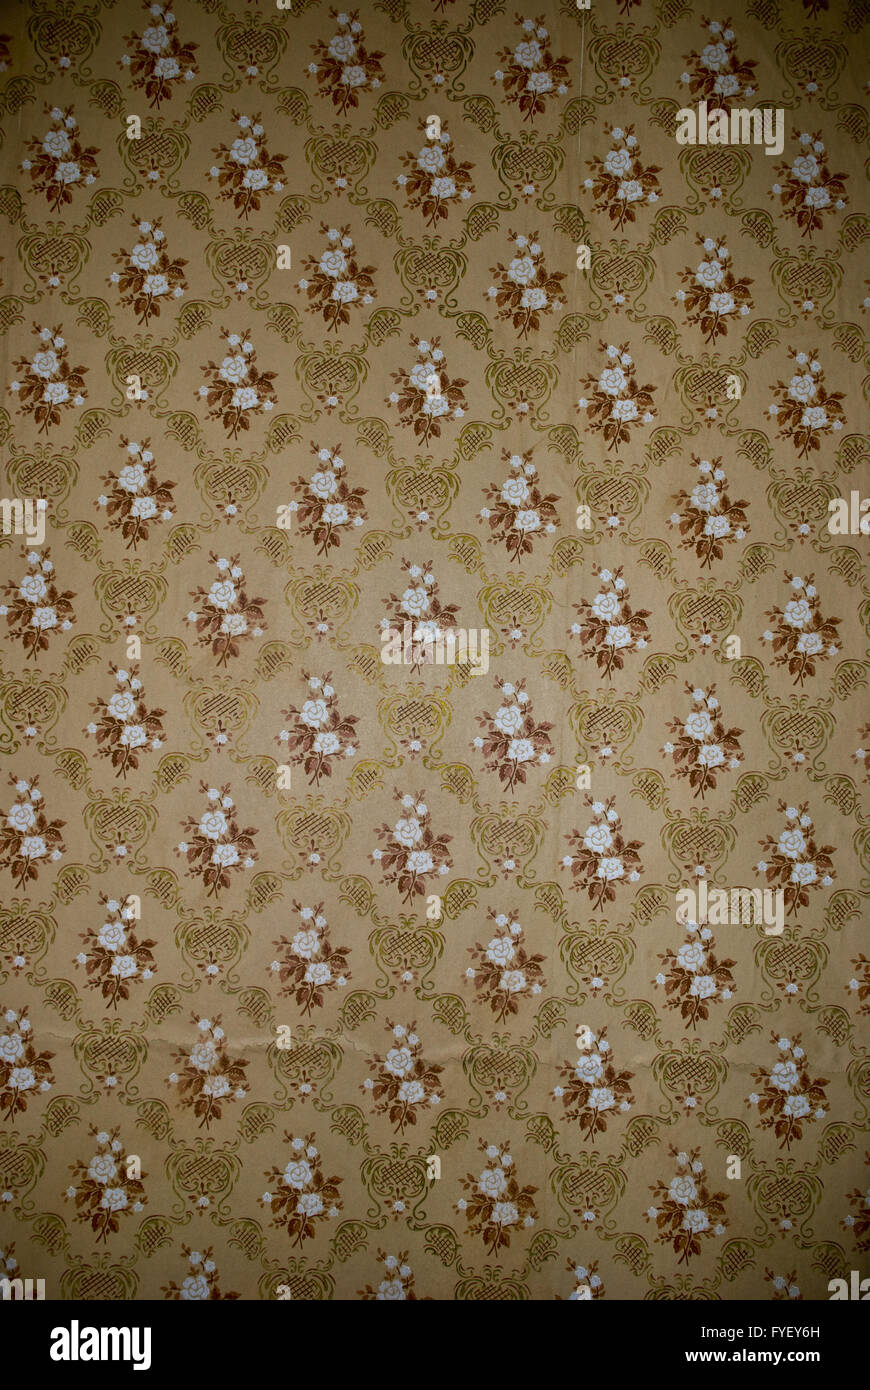 Buy RoseCraft Damask 57 sq ft Wallpaper Painted Online in India at Best  Prices